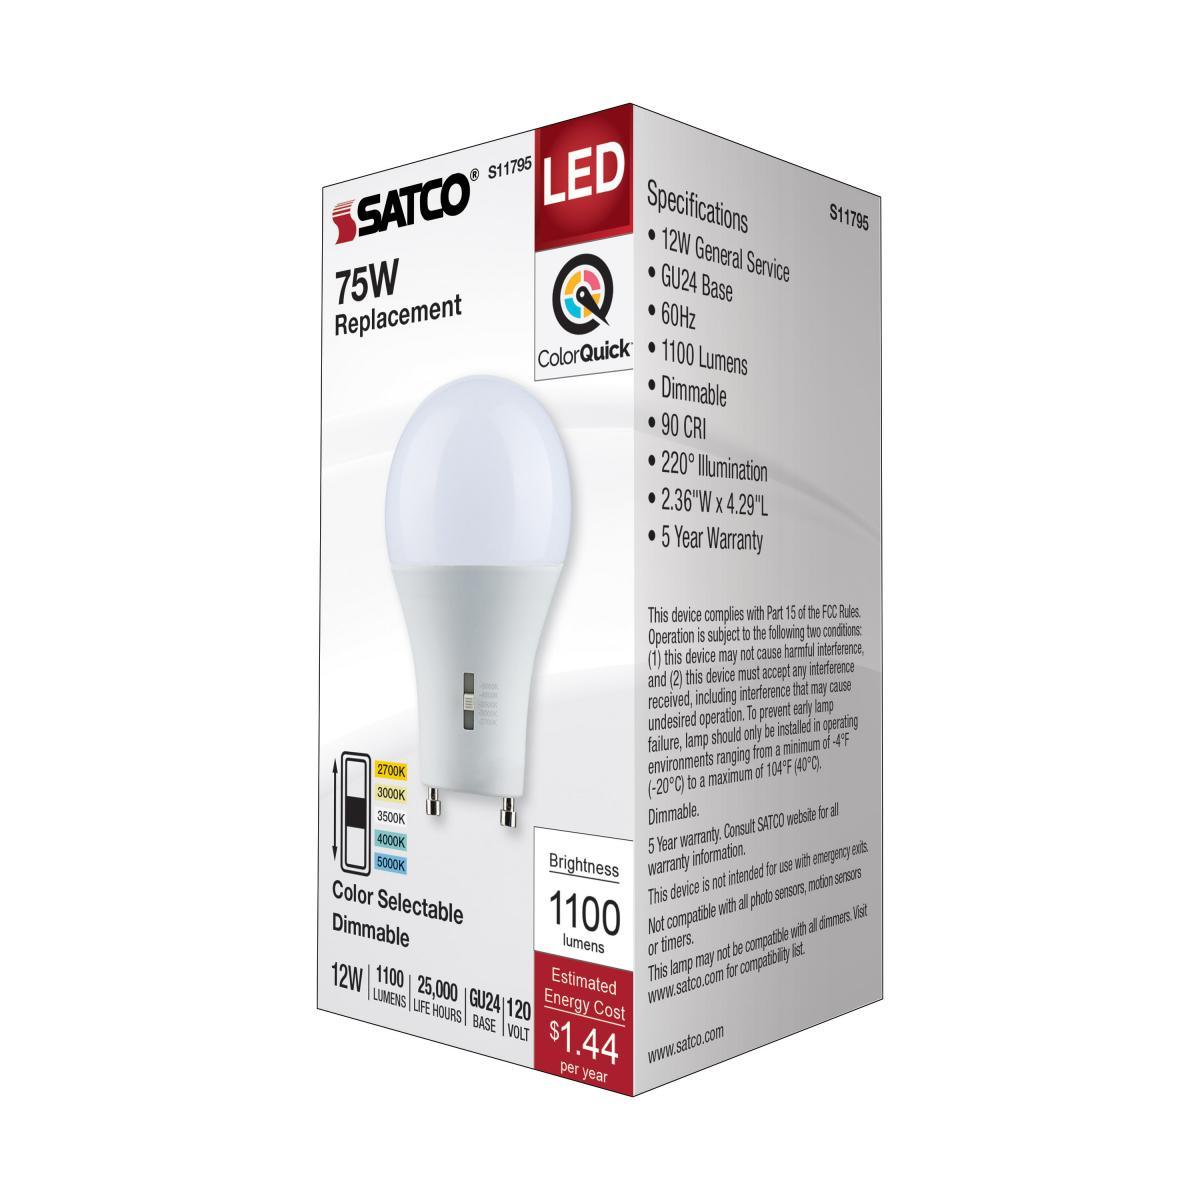 A19 LED Bulb, 75W Equivalent, 12 Watt, 1100 Lumens, Selectable CCT 2700K to 5000K, GU24 Base, Frosted Finish - Bees Lighting